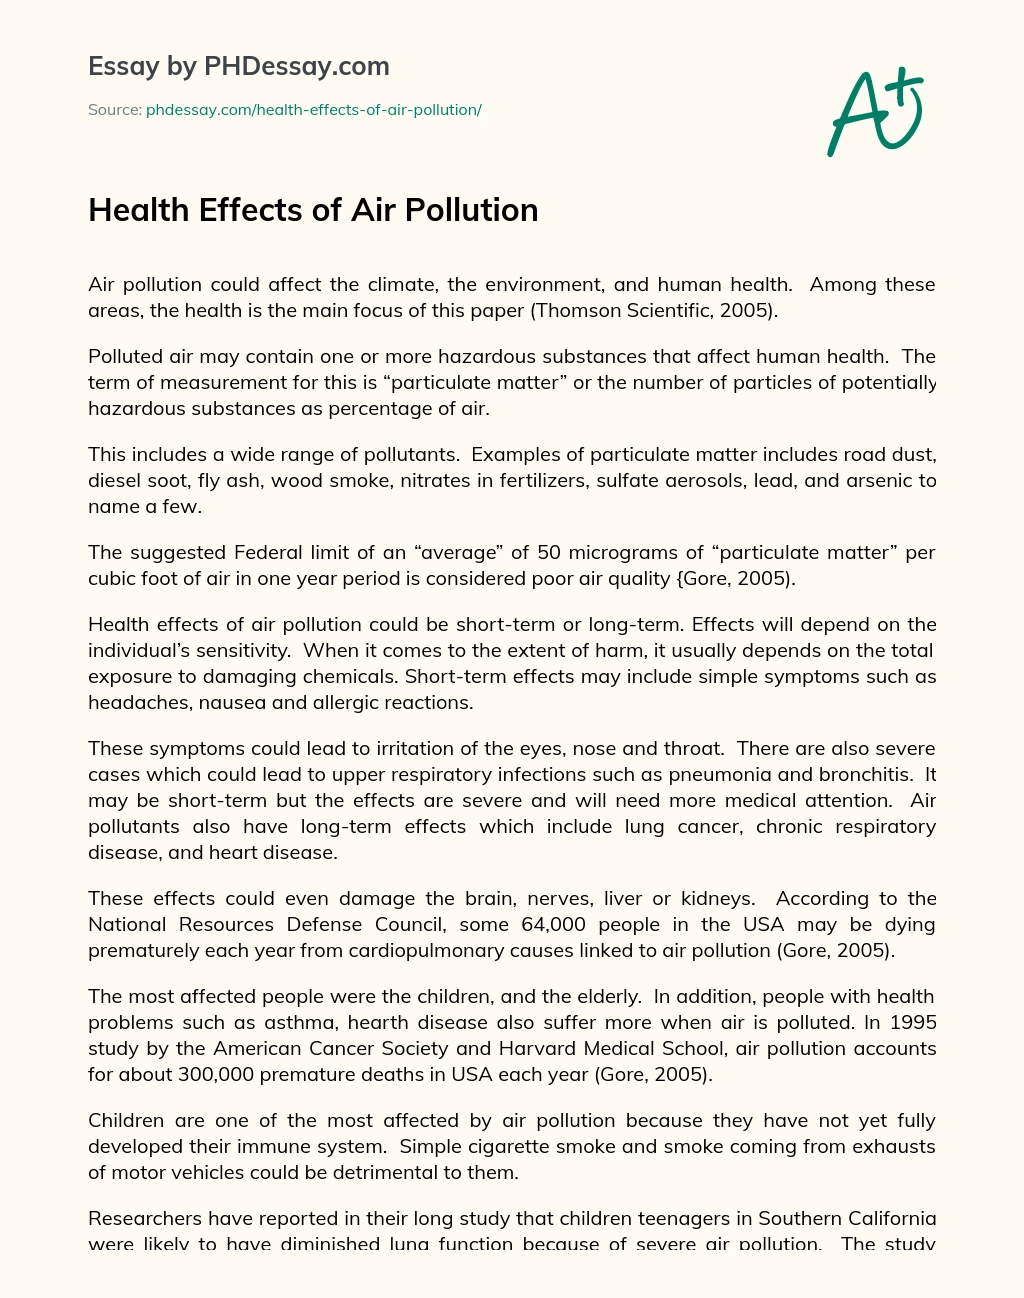 Health Effects of Air Pollution essay